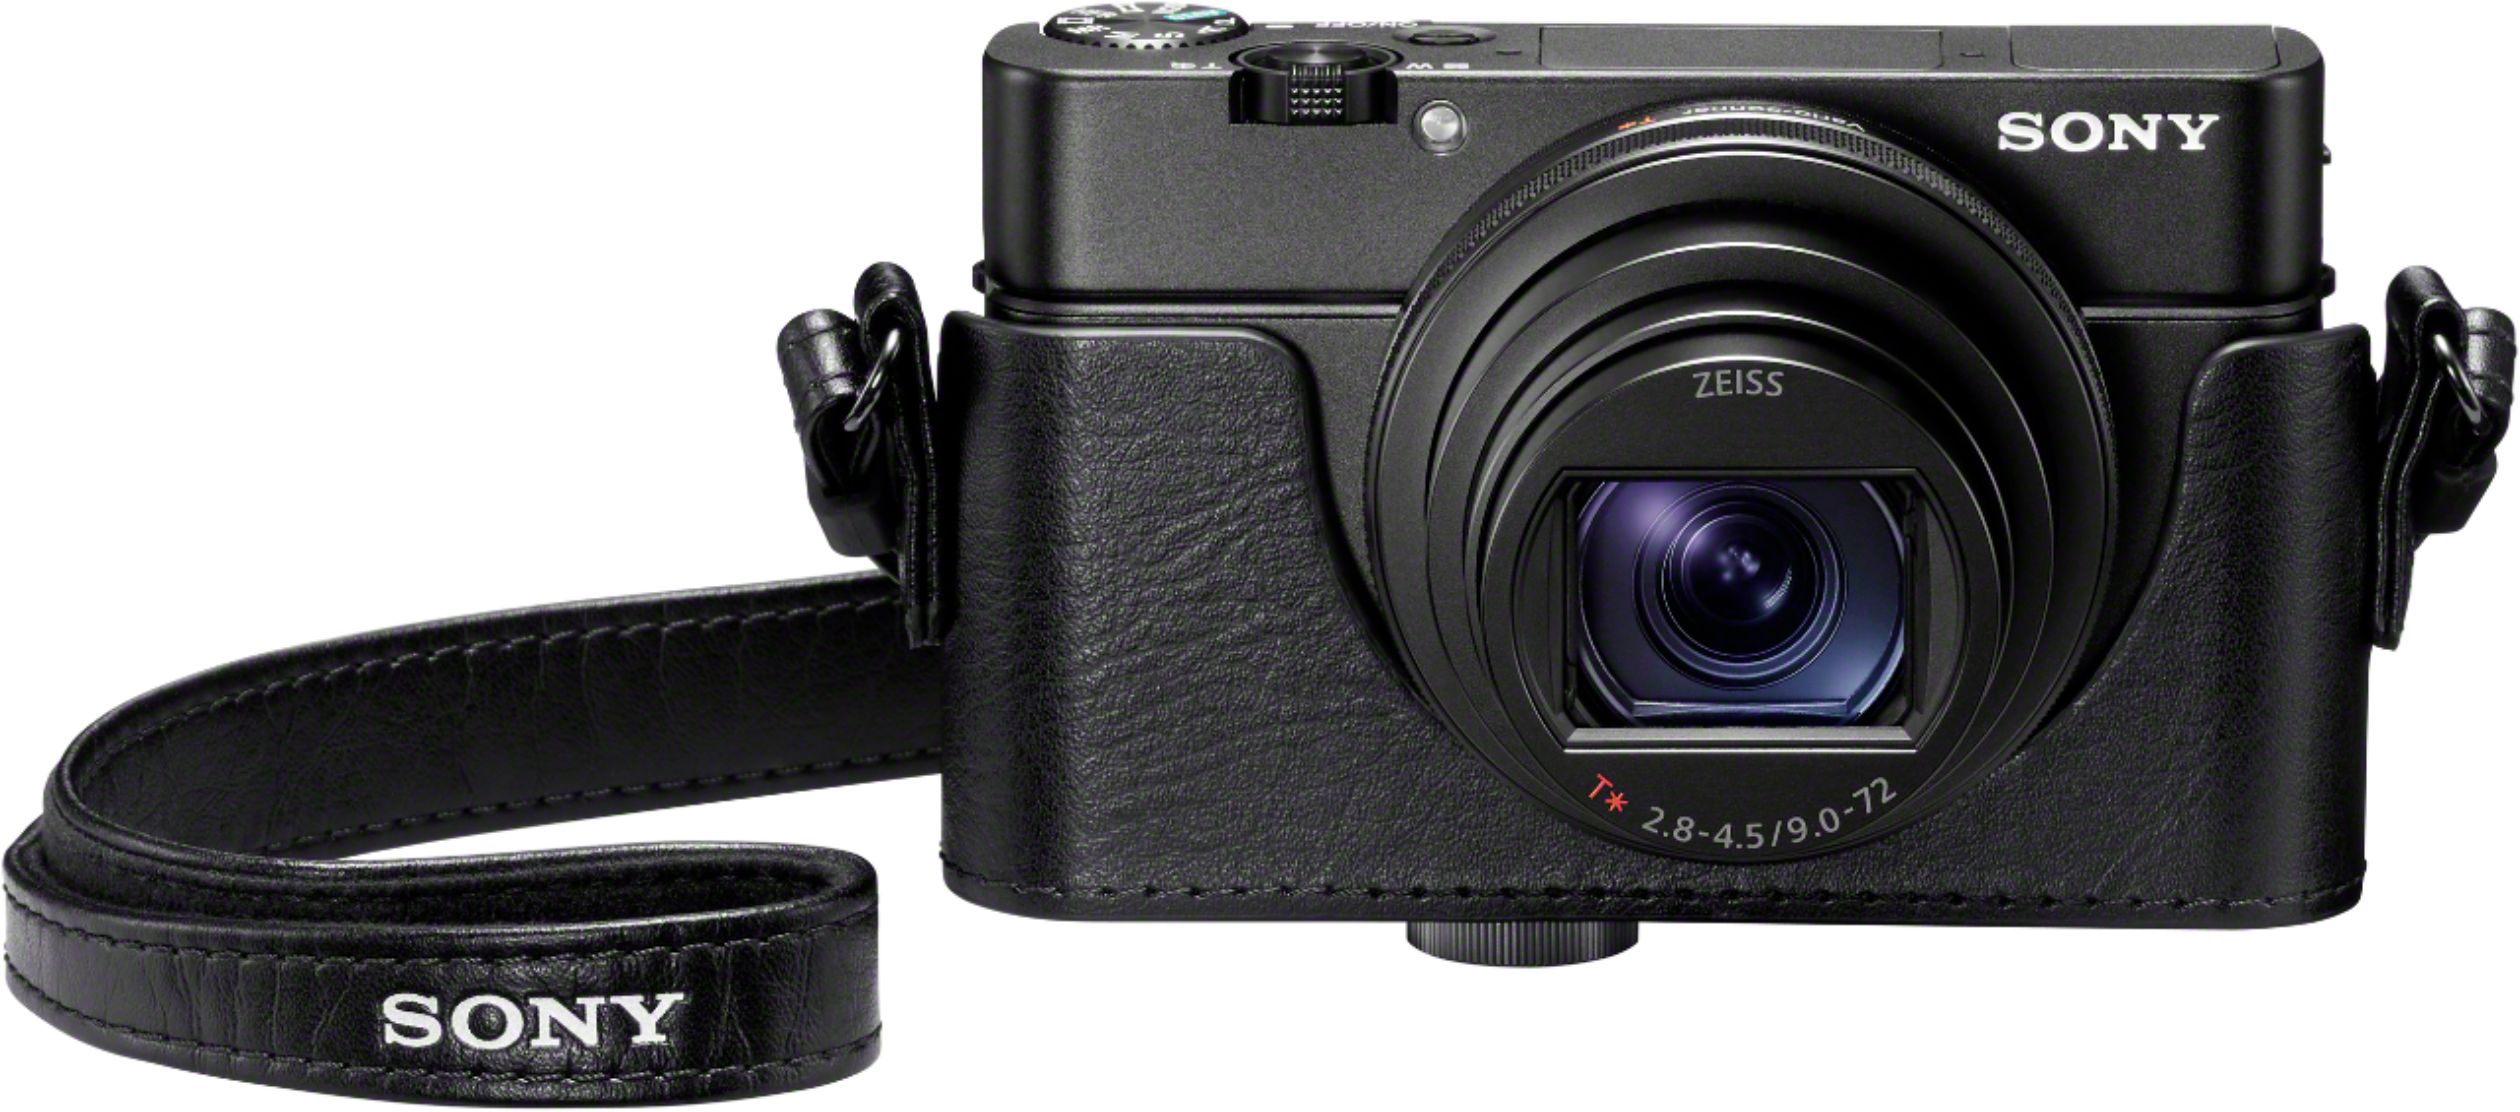 Sony Cyber-shot DSC-RX100 VII Camera with Shooting Grip Kit With Mic Acc  Bundle DSC-RX100M7G M